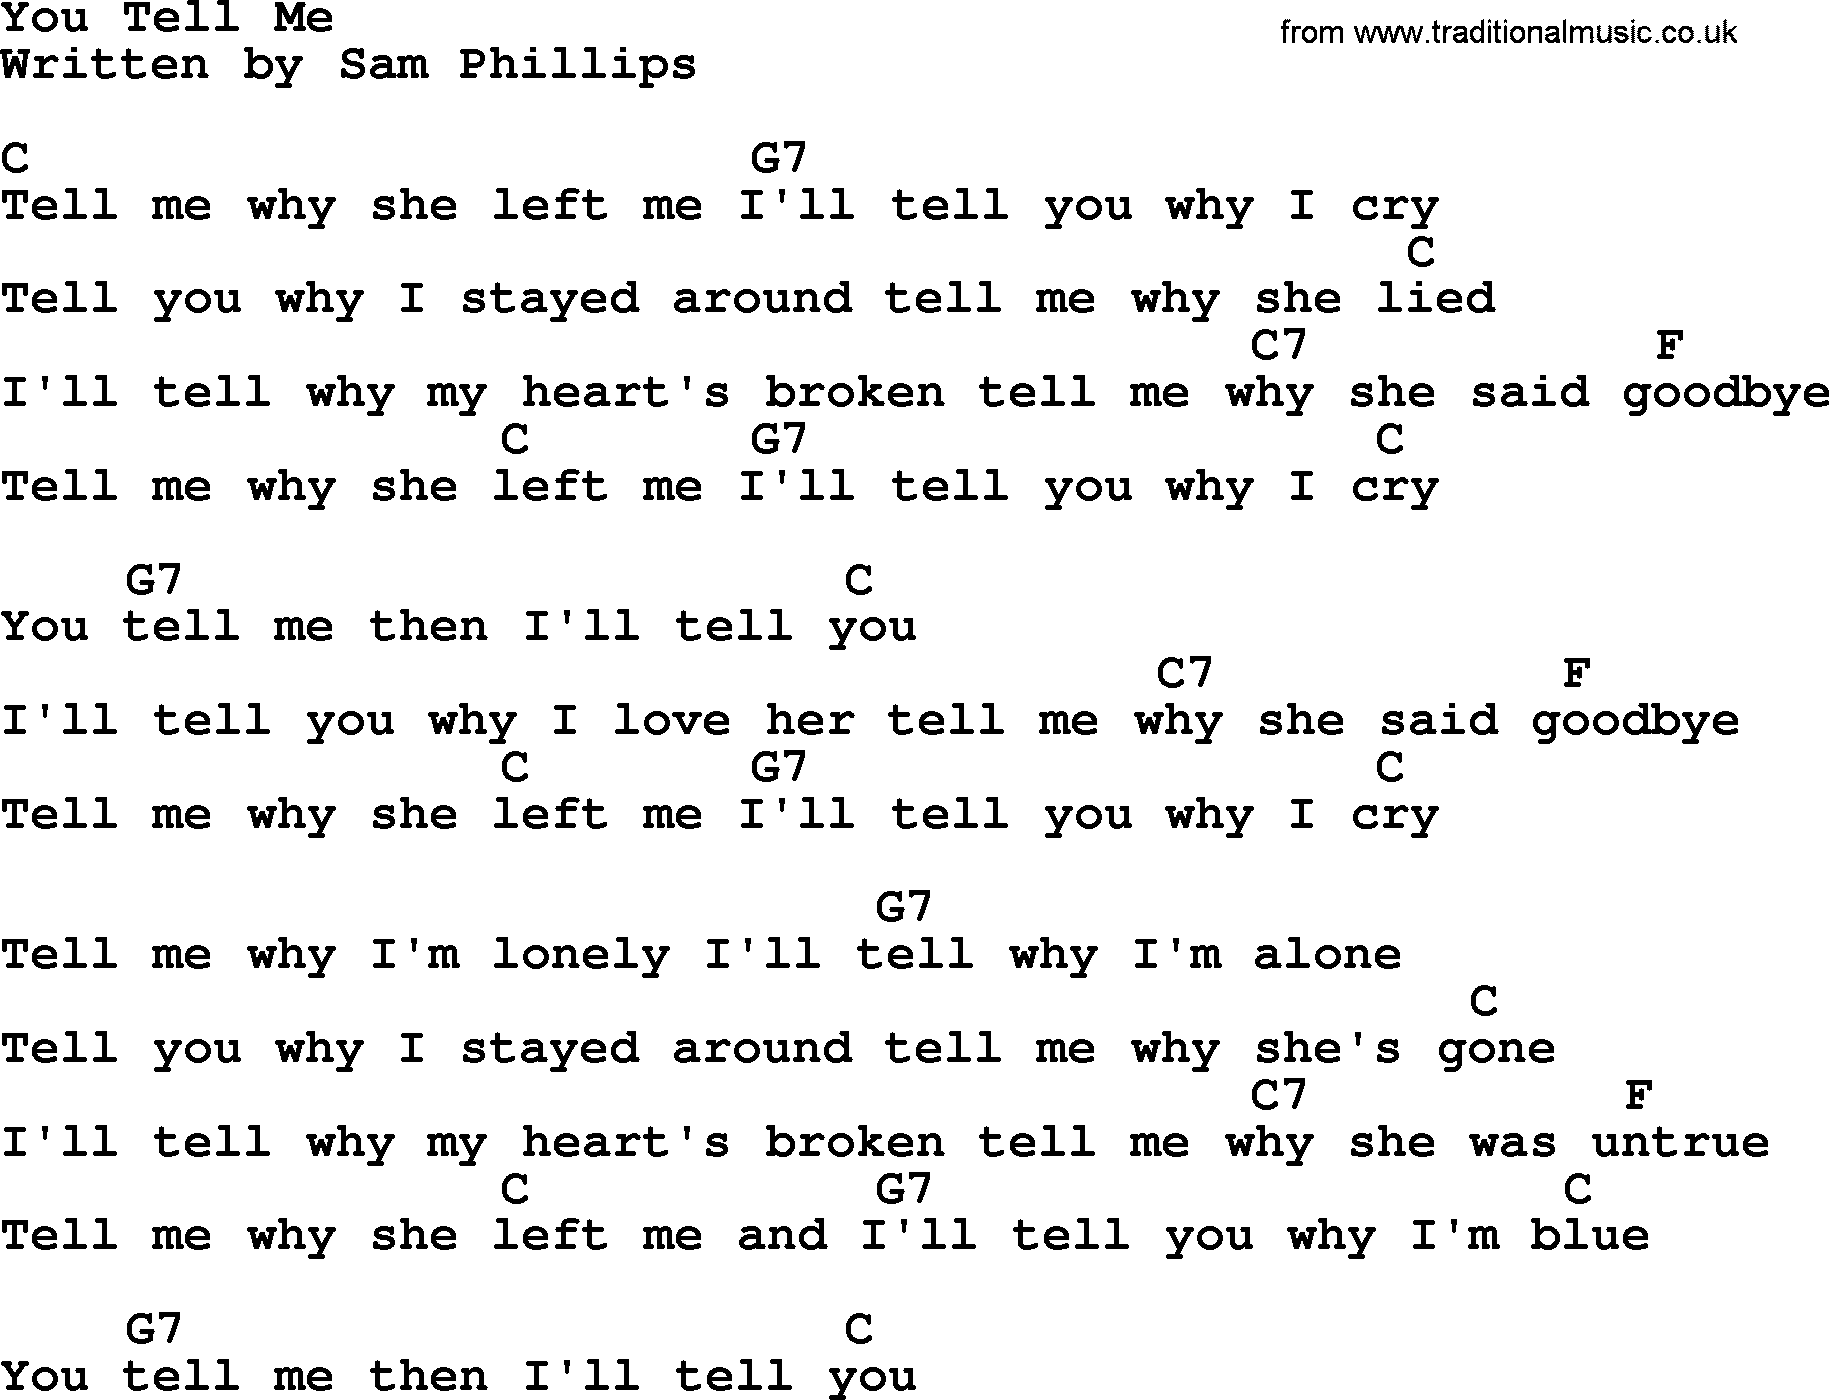 Johnny Cash song: You Tell Me, lyrics and chords